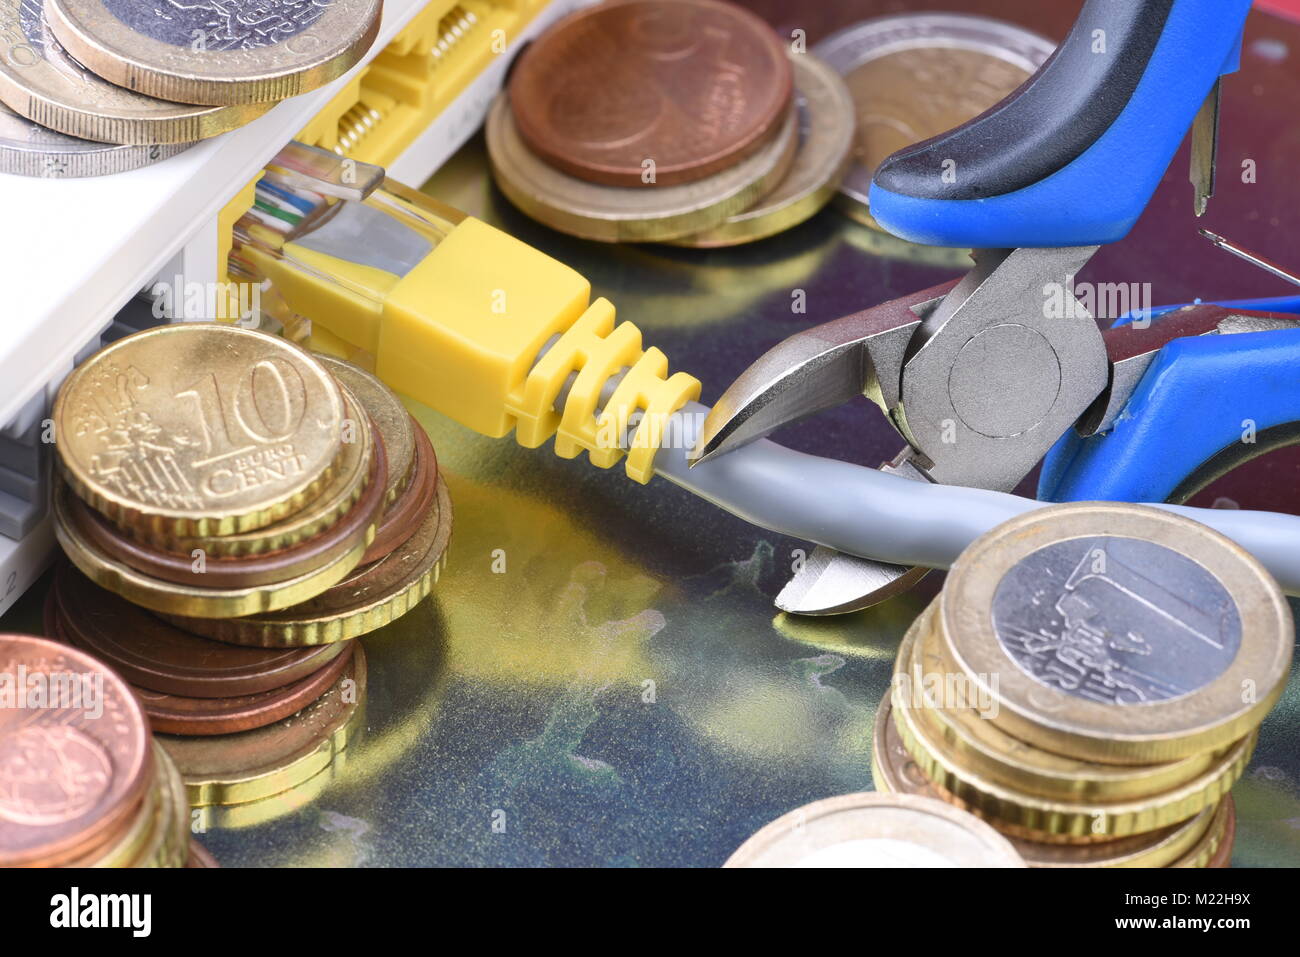 Coins and network router, paid access to the network Stock Photo